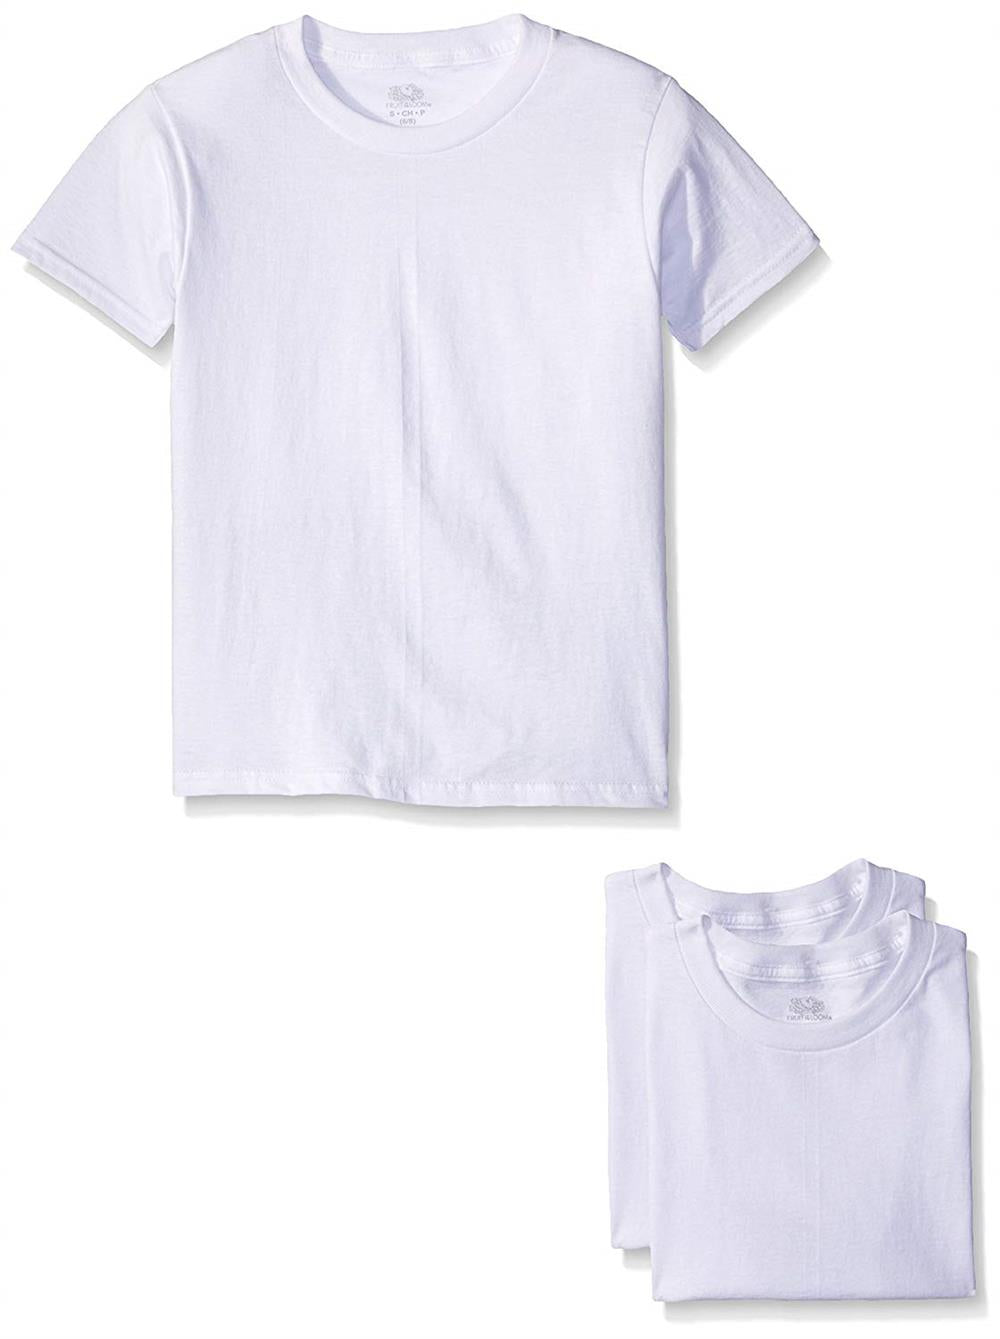 Fruit of the Loom Boys 2T-4T Crew Neck Tee - 3 Pack